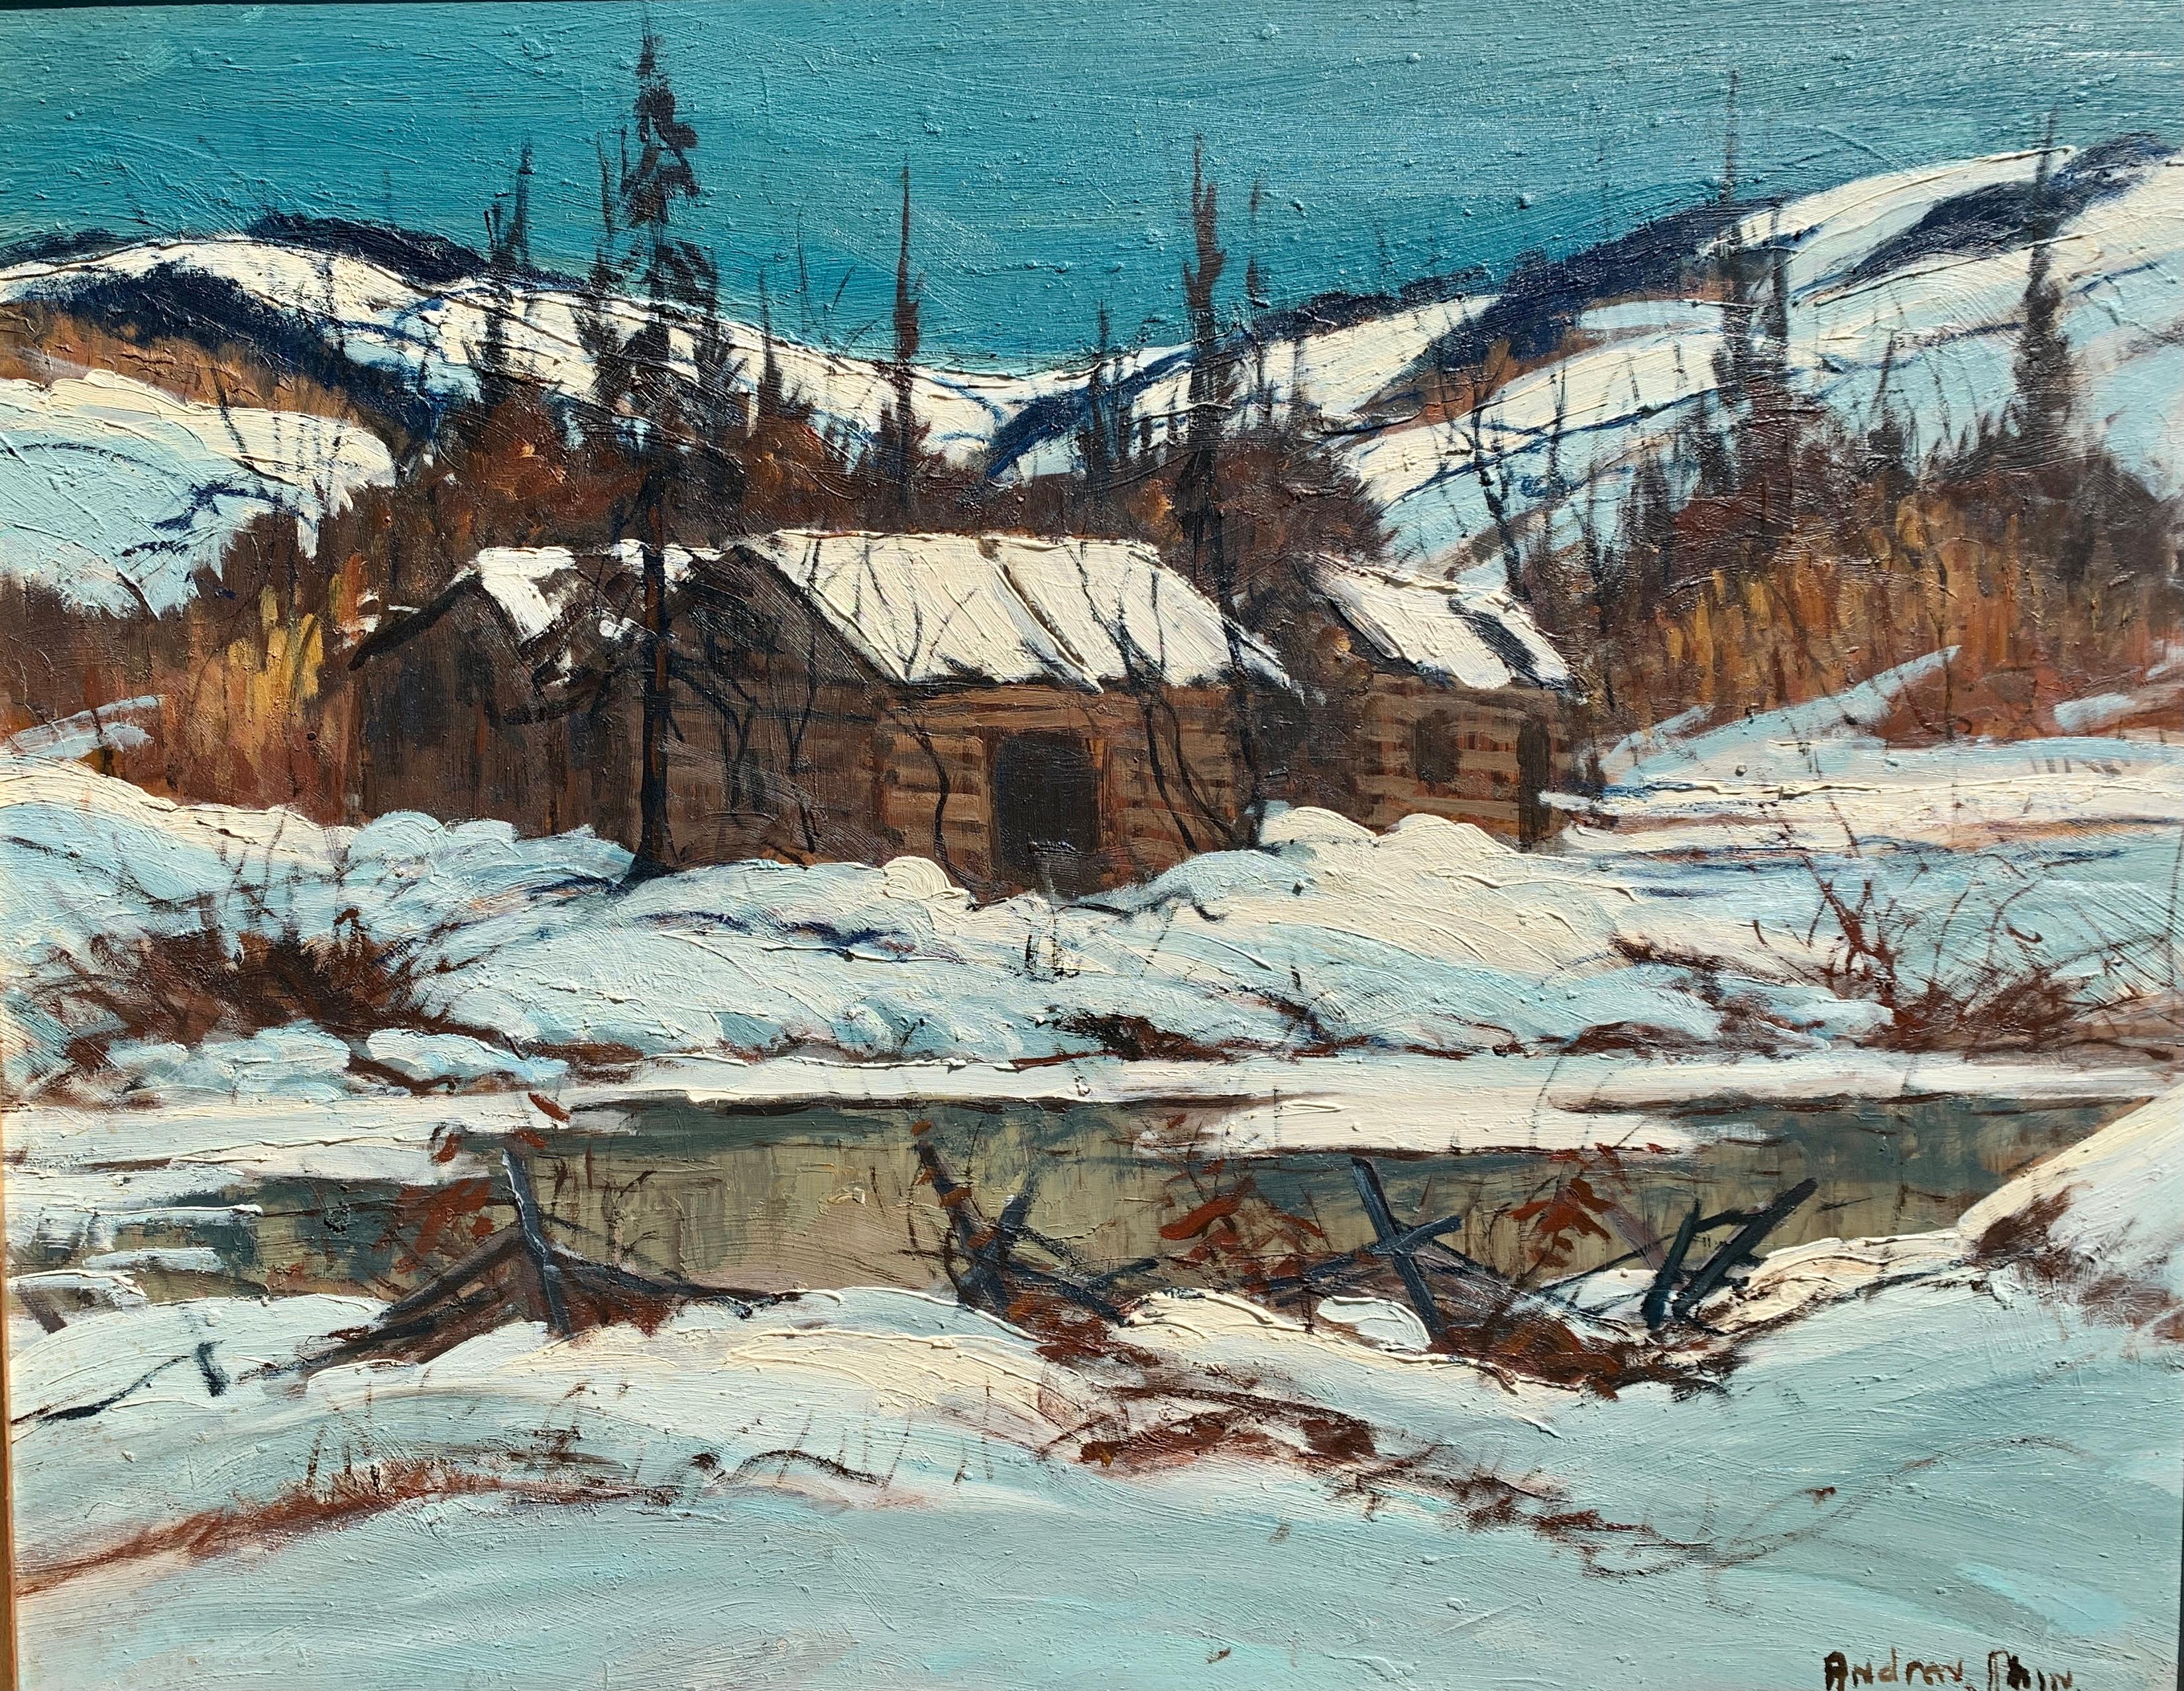 Mid 20th Century Canadian snow covered landscape, Halliburton Highlands Ontario - Painting by 20th century Canadian School